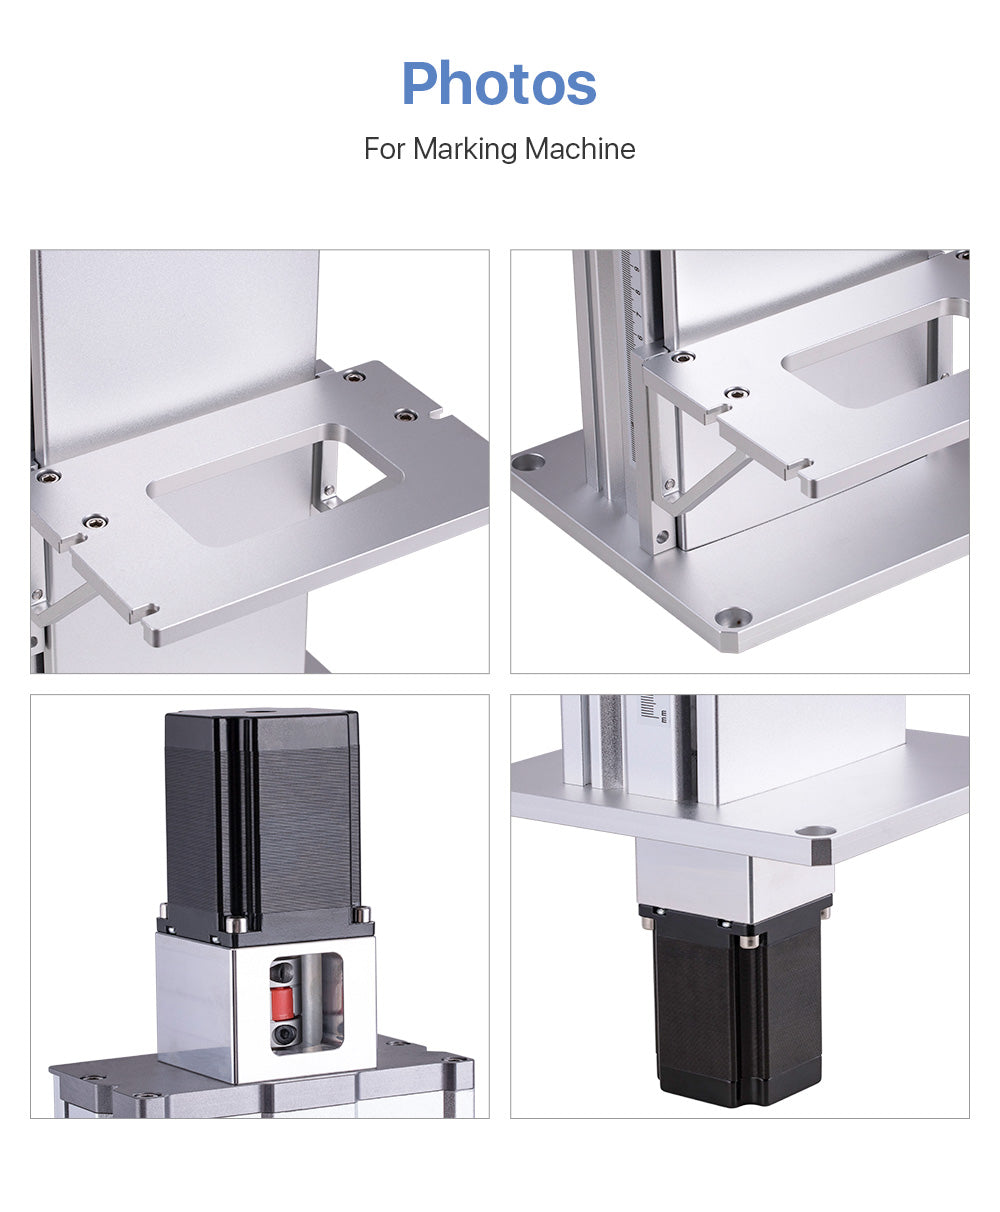 Cloudray Laser Lift Table for Marking Machine